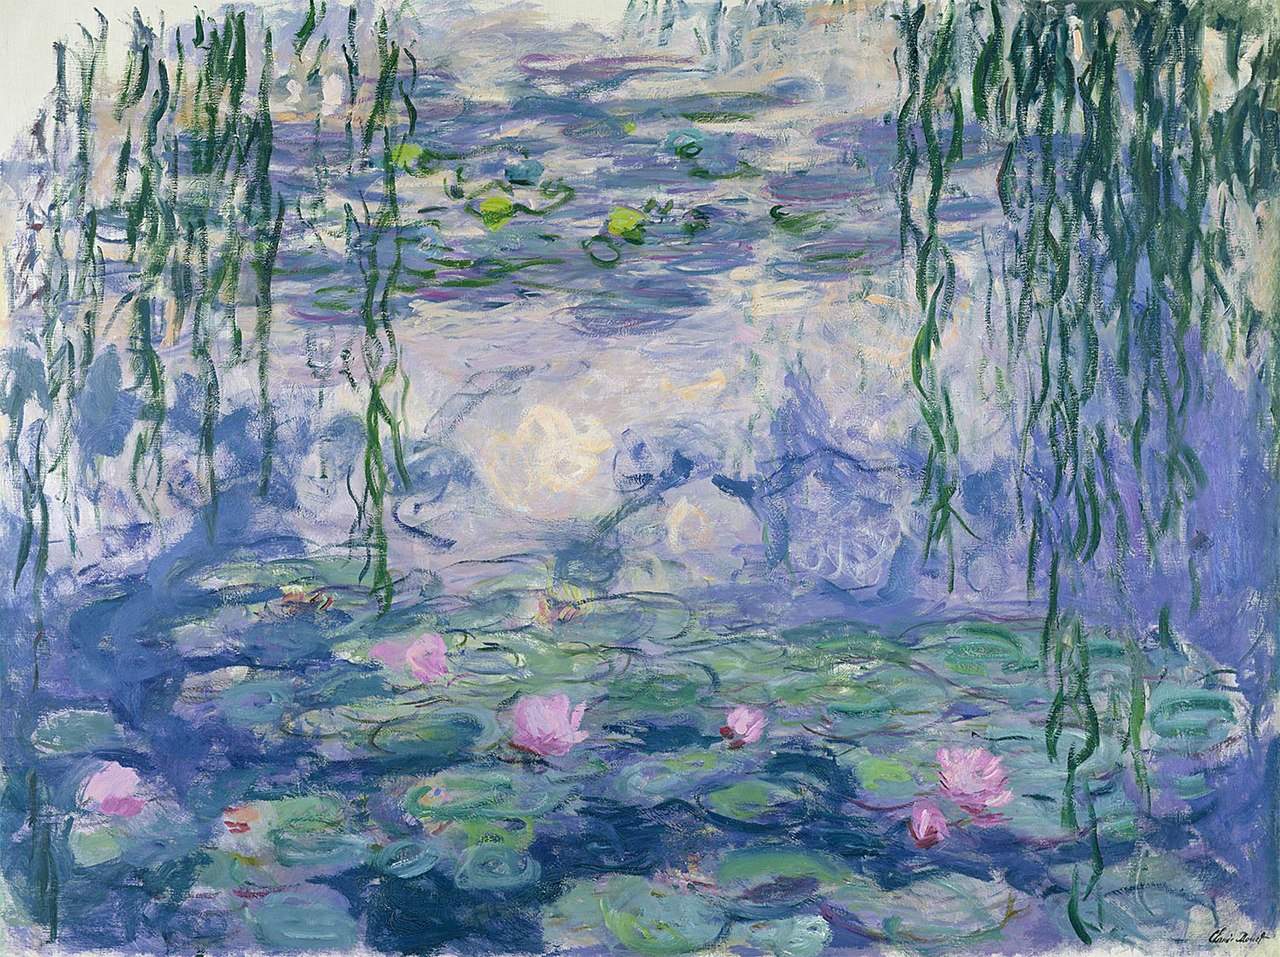 Monet's Water Lilies on display in Genoa, Palazzo Ducale